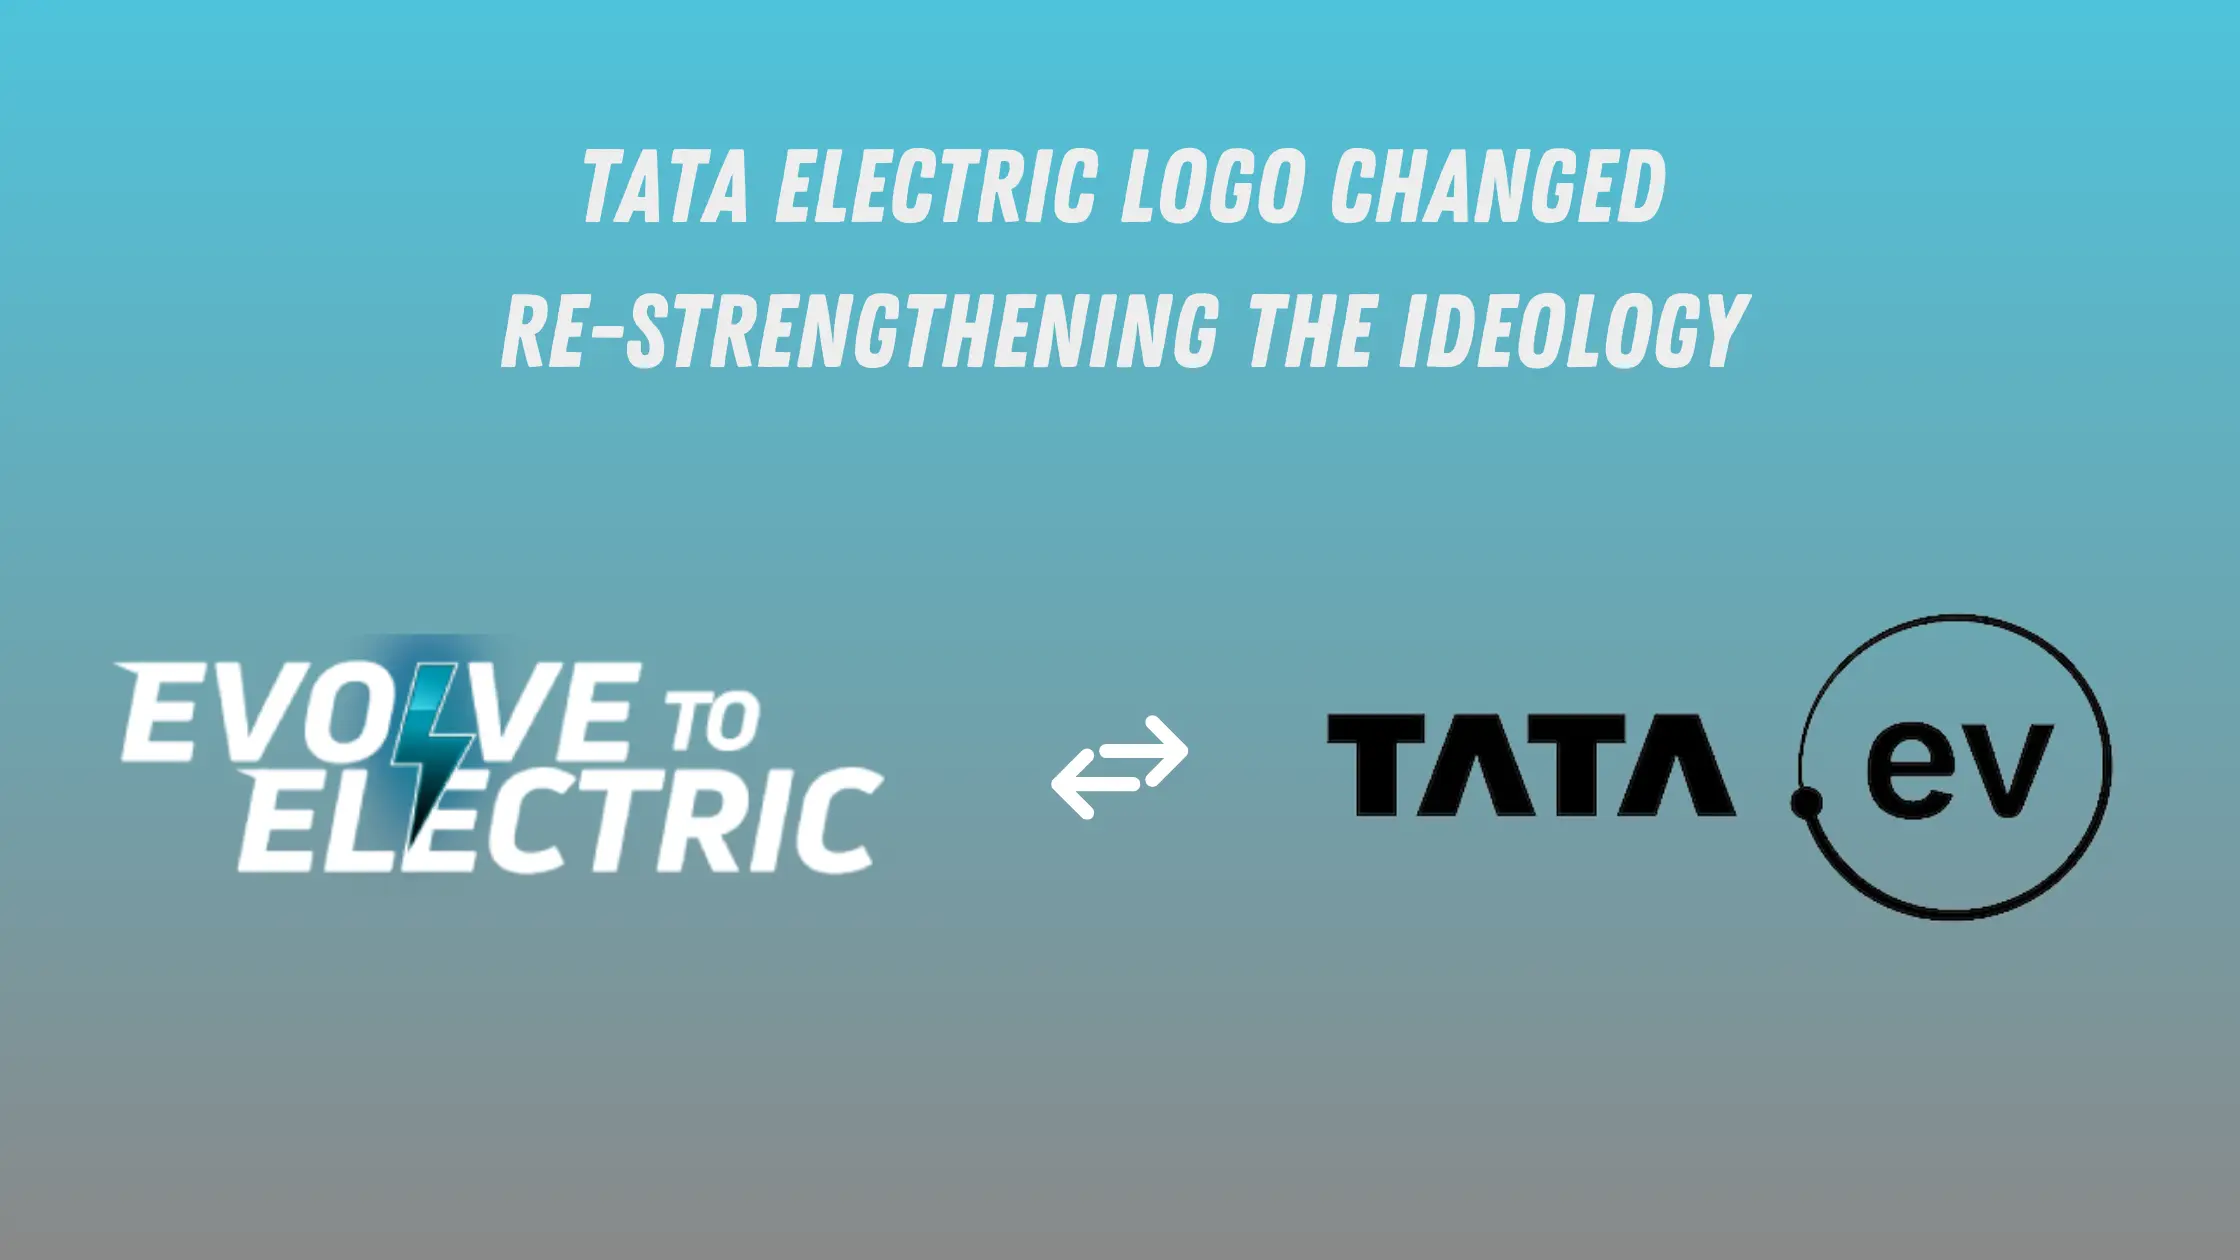 Read more about the article “Tata EV” is Renamed to Tata.ev, Here’s why it matters.